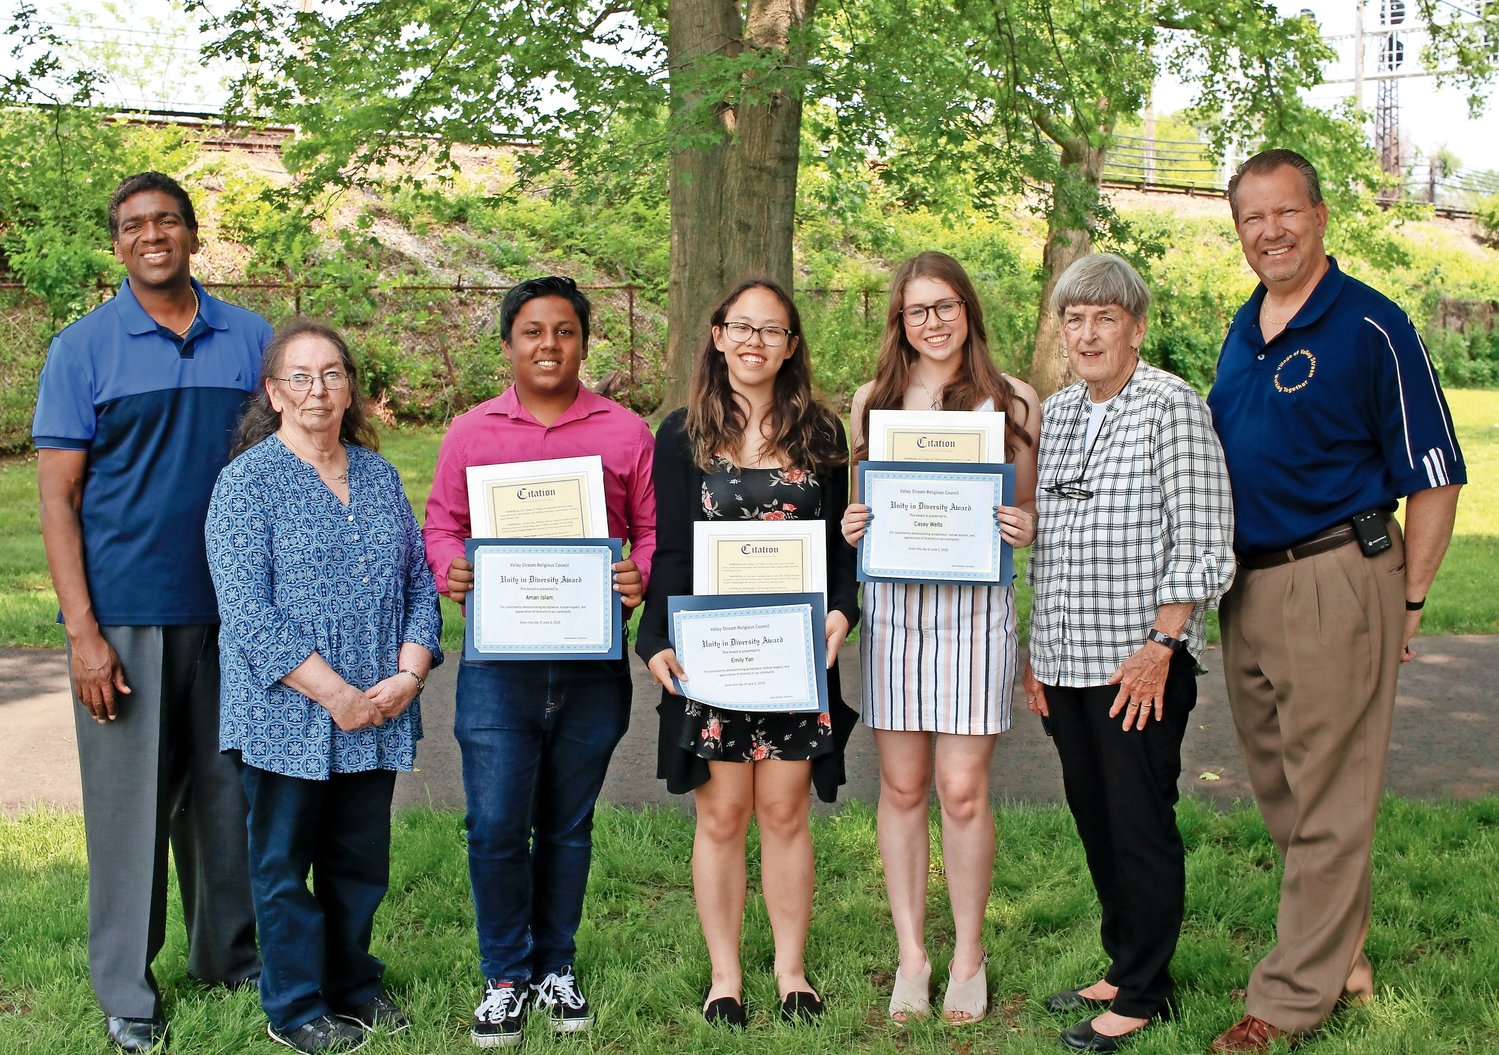 valley-stream-high-schoolers-honored-for-accepting-diversity-herald